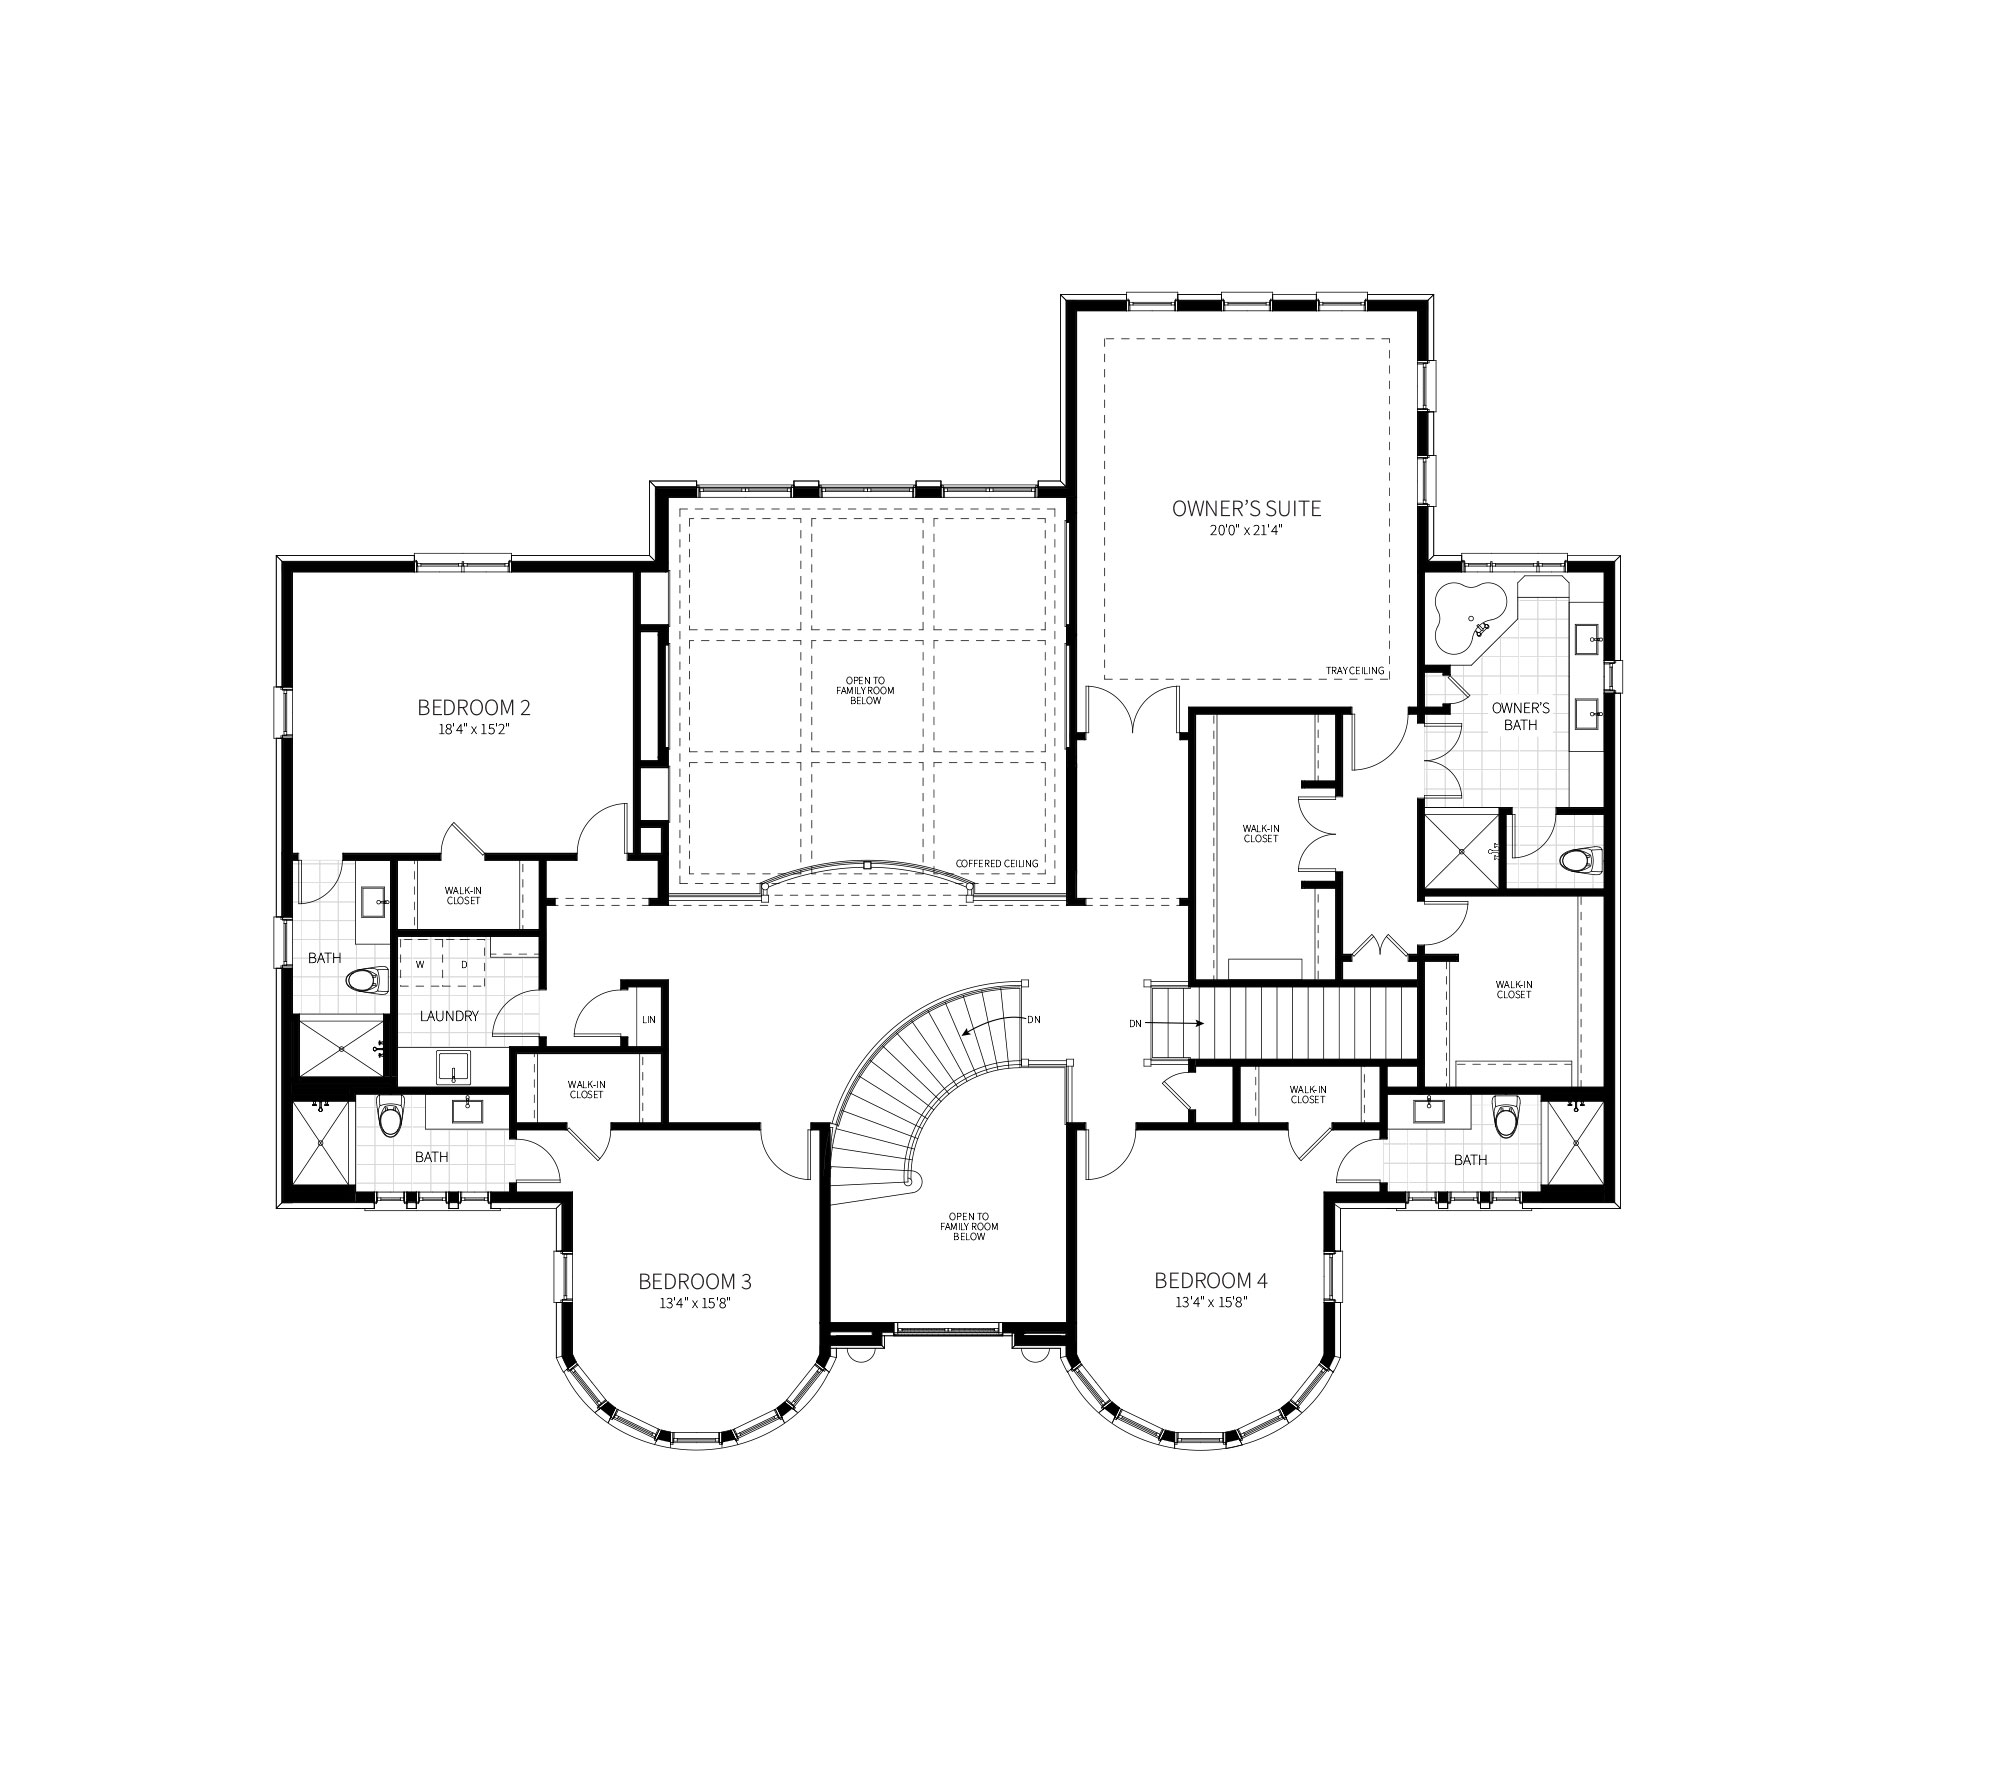 The Oakyln second floor plan features an expansive Owner's Suite, and overlooks into the two-story foyer and family room.